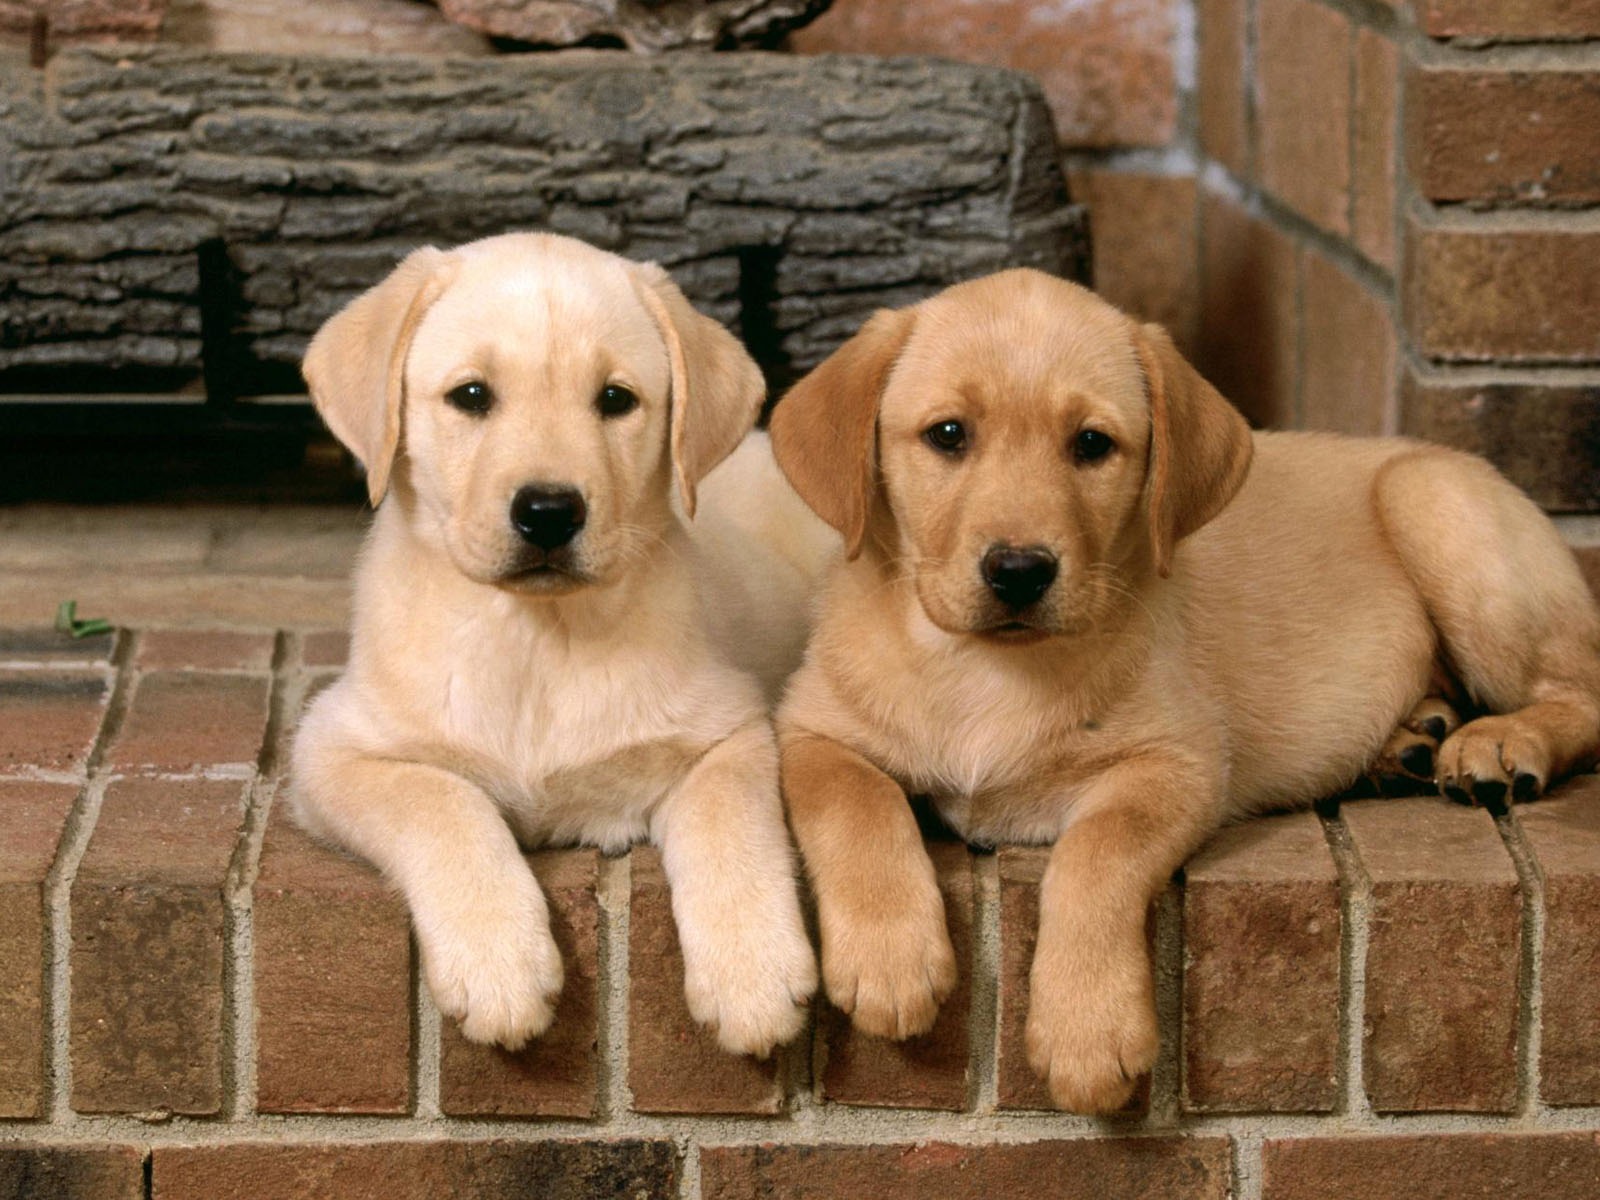 Puppy Photo HD wallpapers (2) #11 - 1600x1200